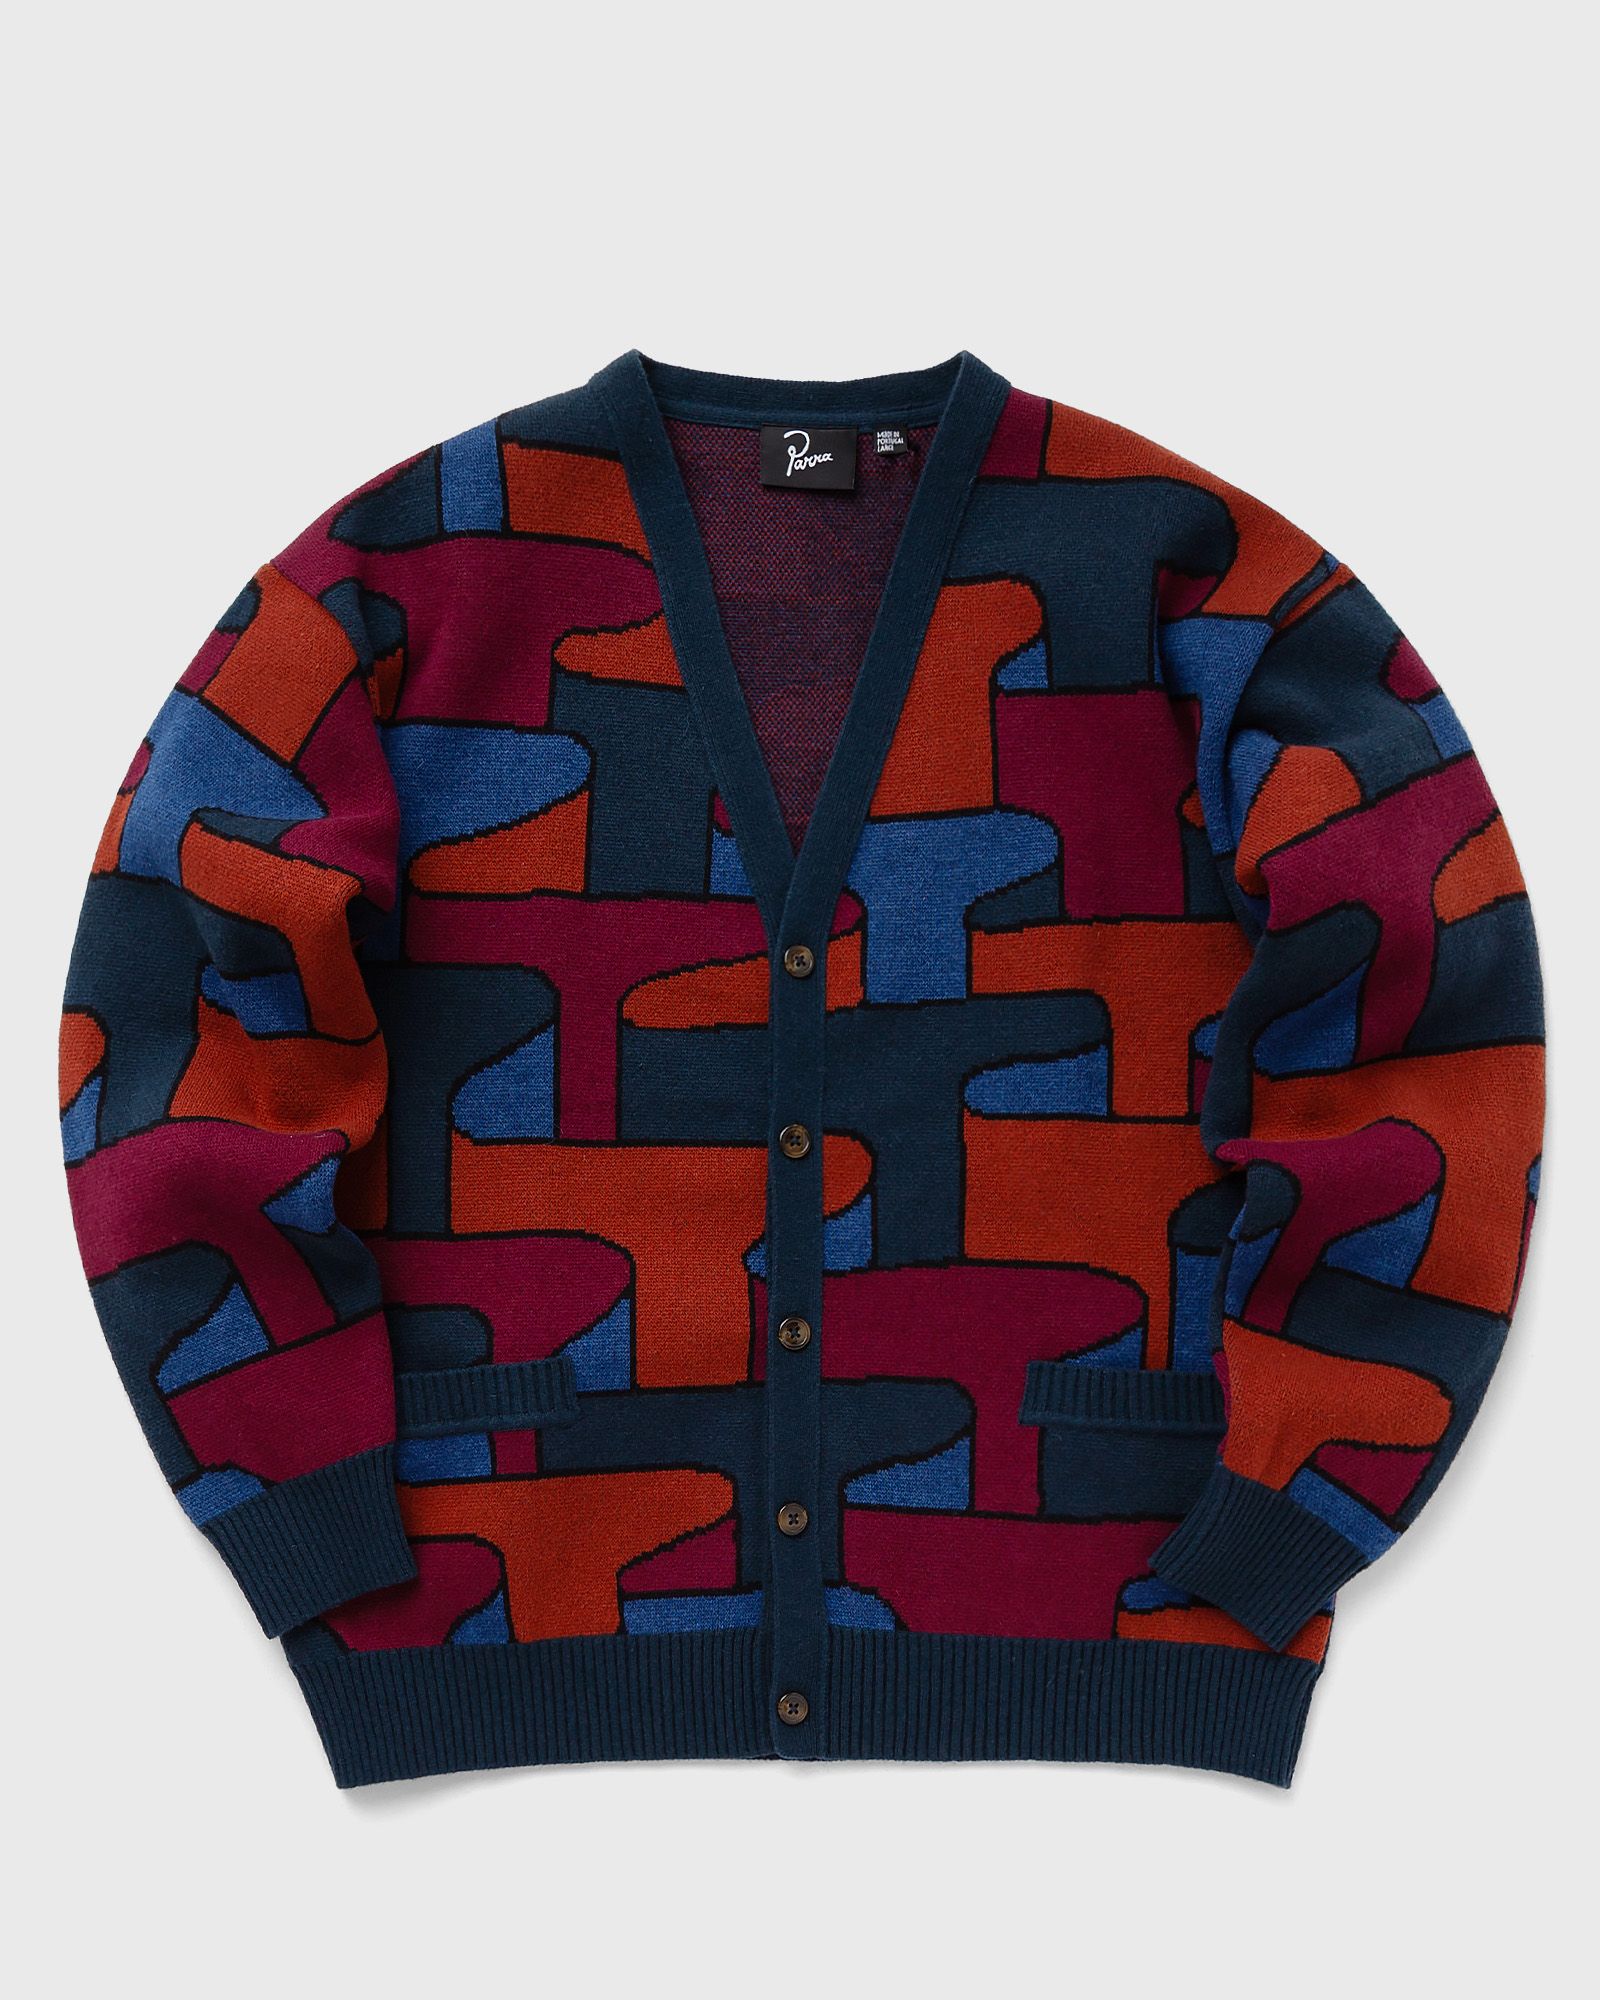 By Parra - canyons all over knitted cardigan men zippers & cardigans blue|red in größe:xxl